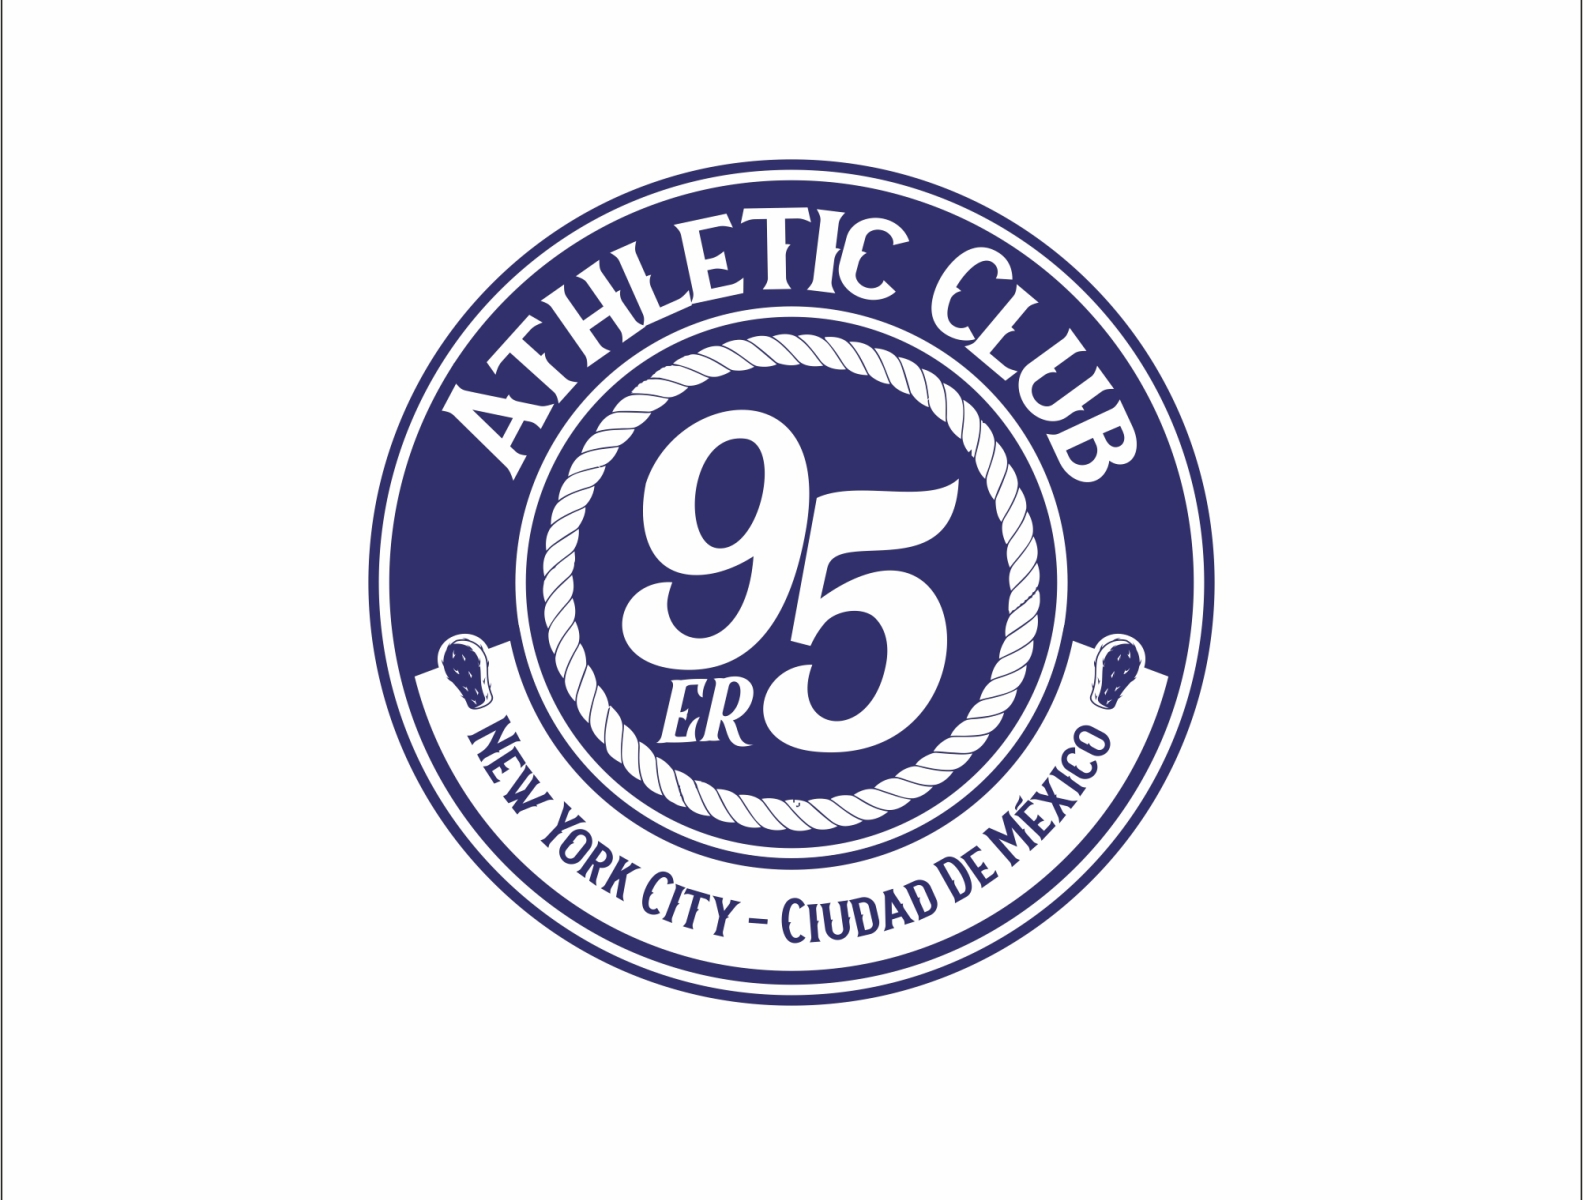 95er Athletic Club by Indra DICLVX on Dribbble